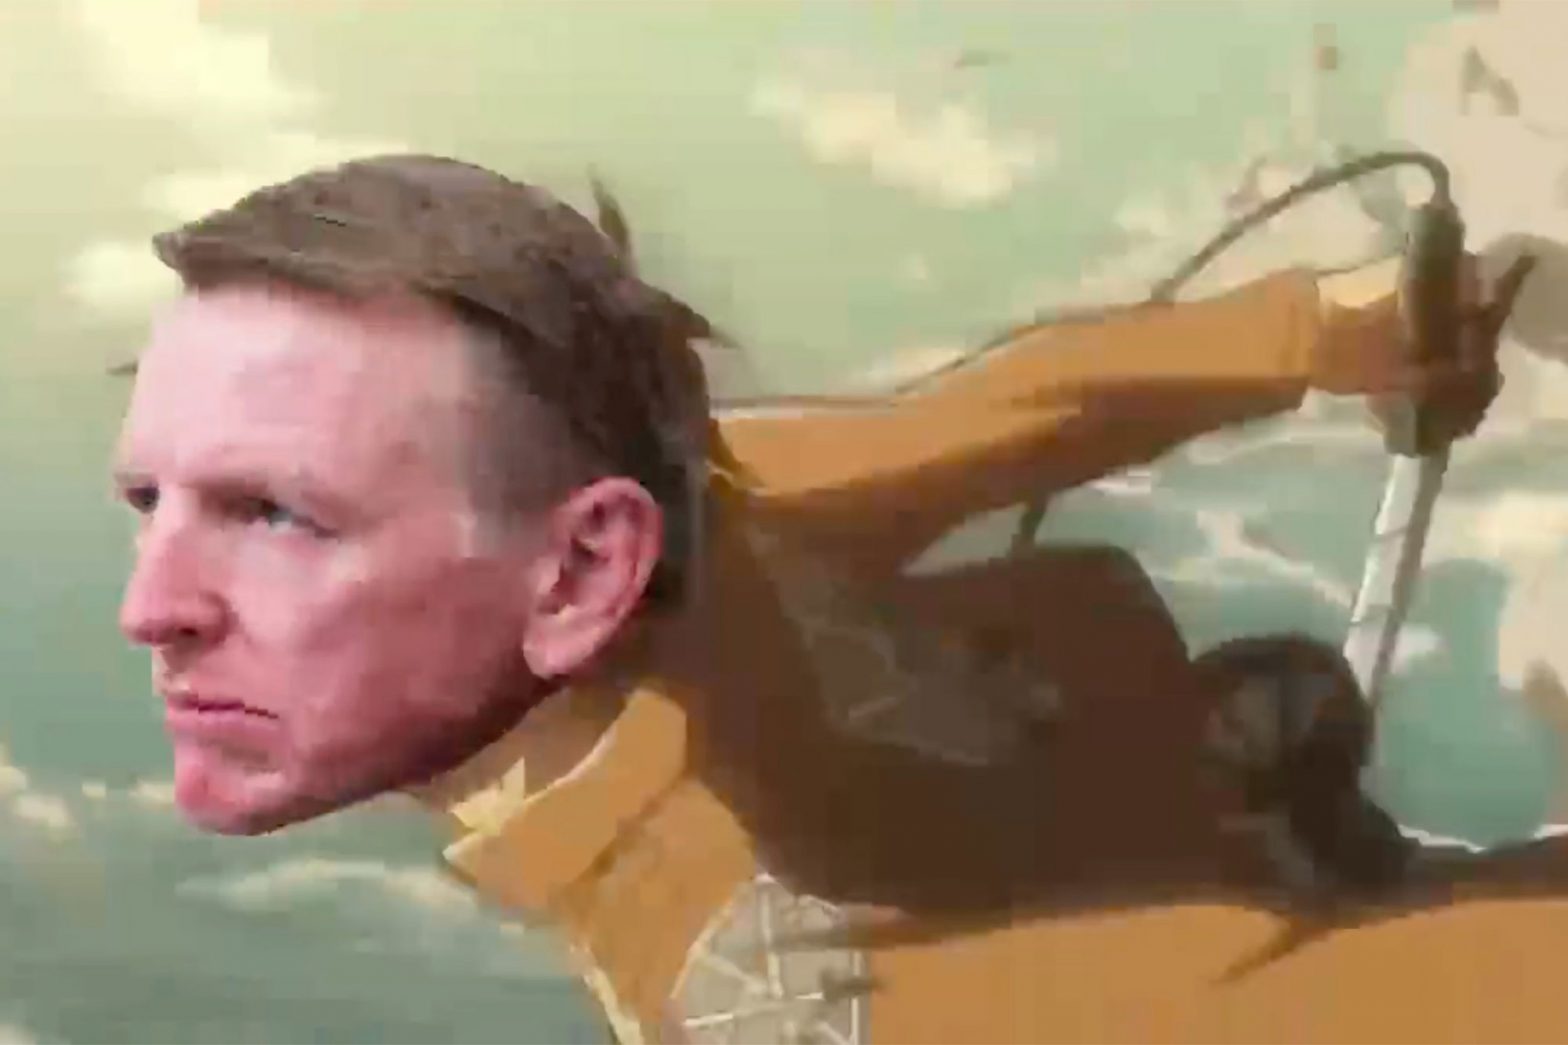 Momentum Building for Gosar Censure Over Tweeted Video